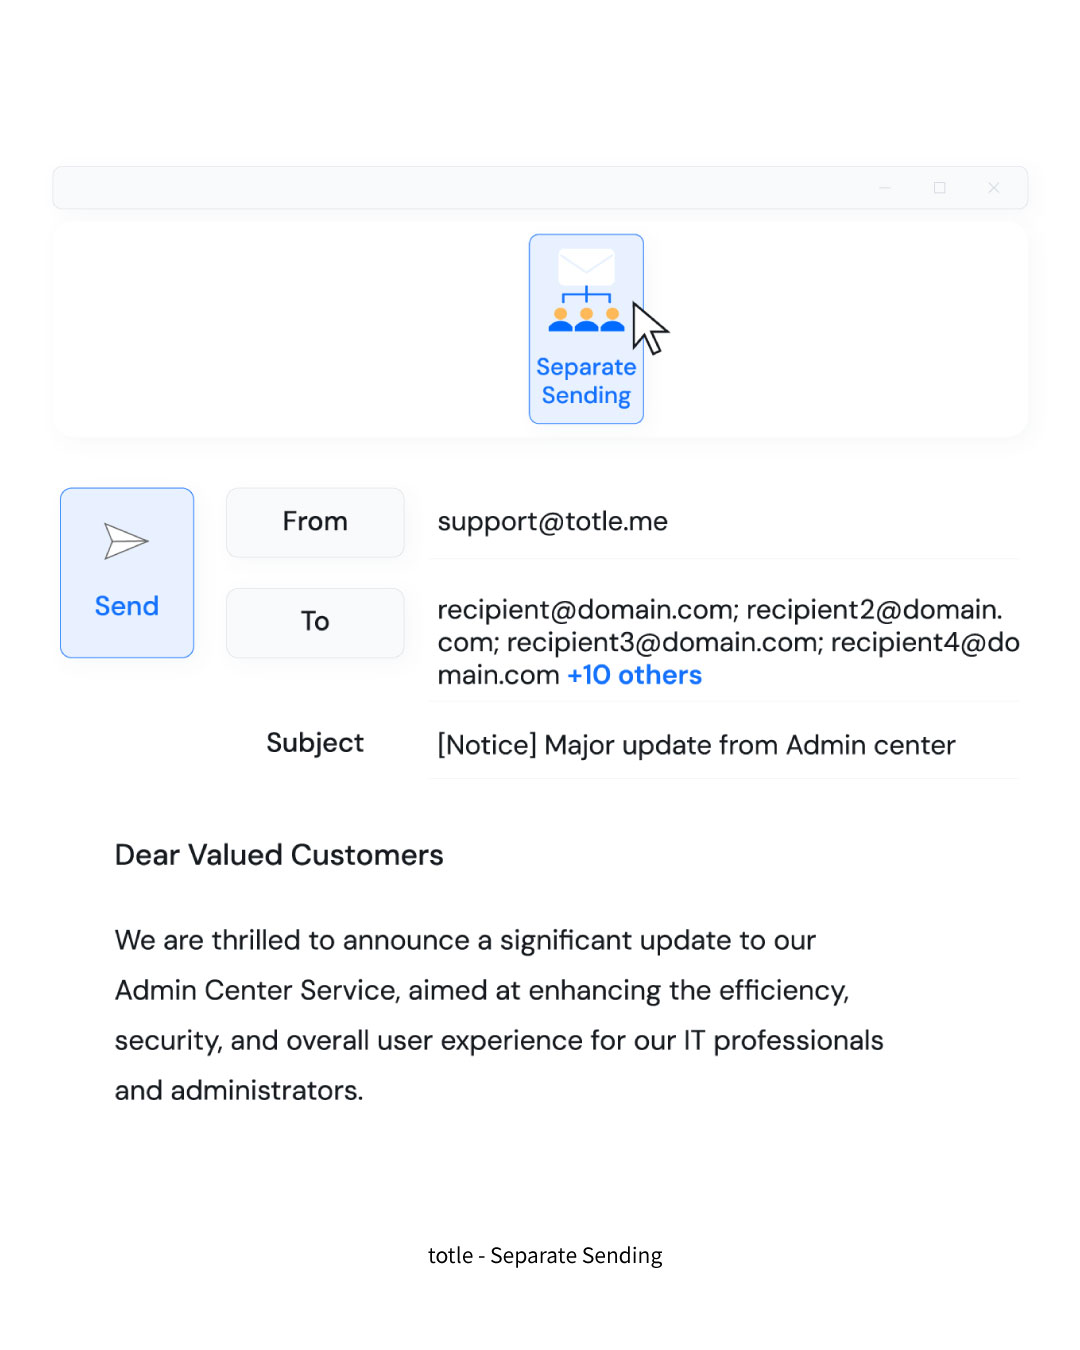 Seperate Sending: You can send an email to multiple recipients with a single click. It's very useful when you have to send the same email item like newsletters, and announcements to more than 2 people separately.